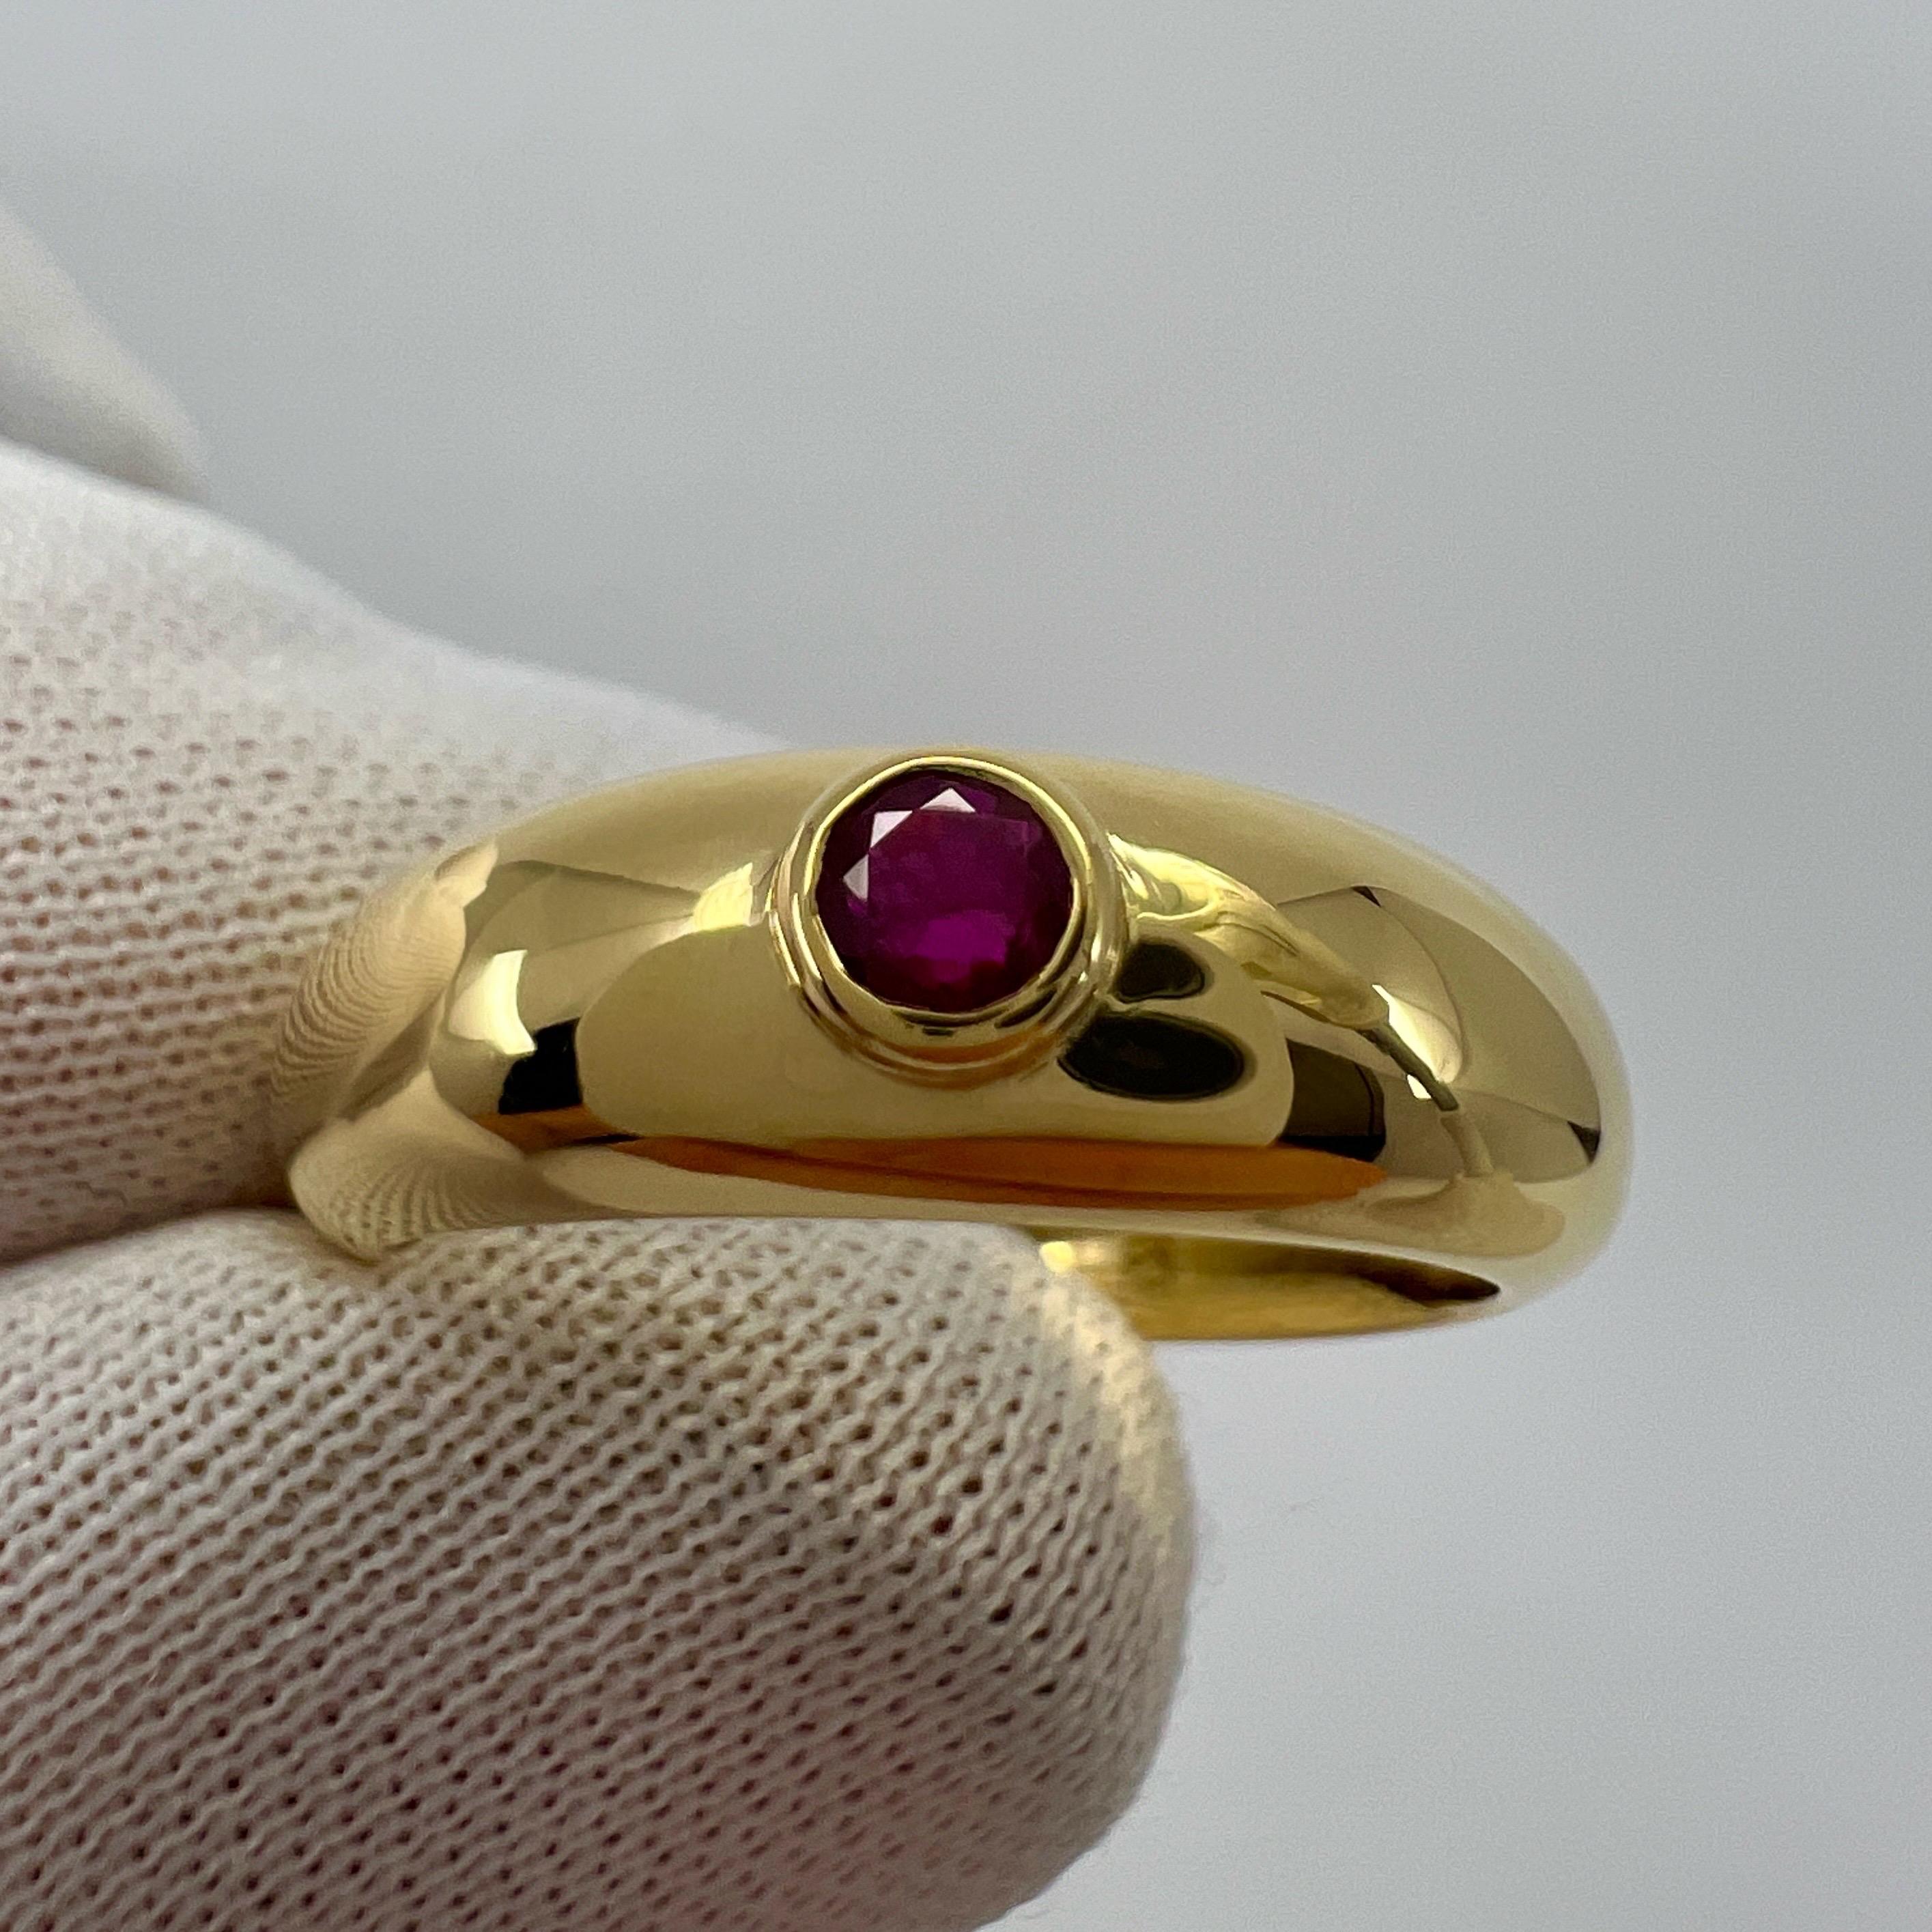 Vintage Cartier Round Cut Red Ruby 18k Yellow Gold Signet Style Domed Ring US5.5 For Sale 8